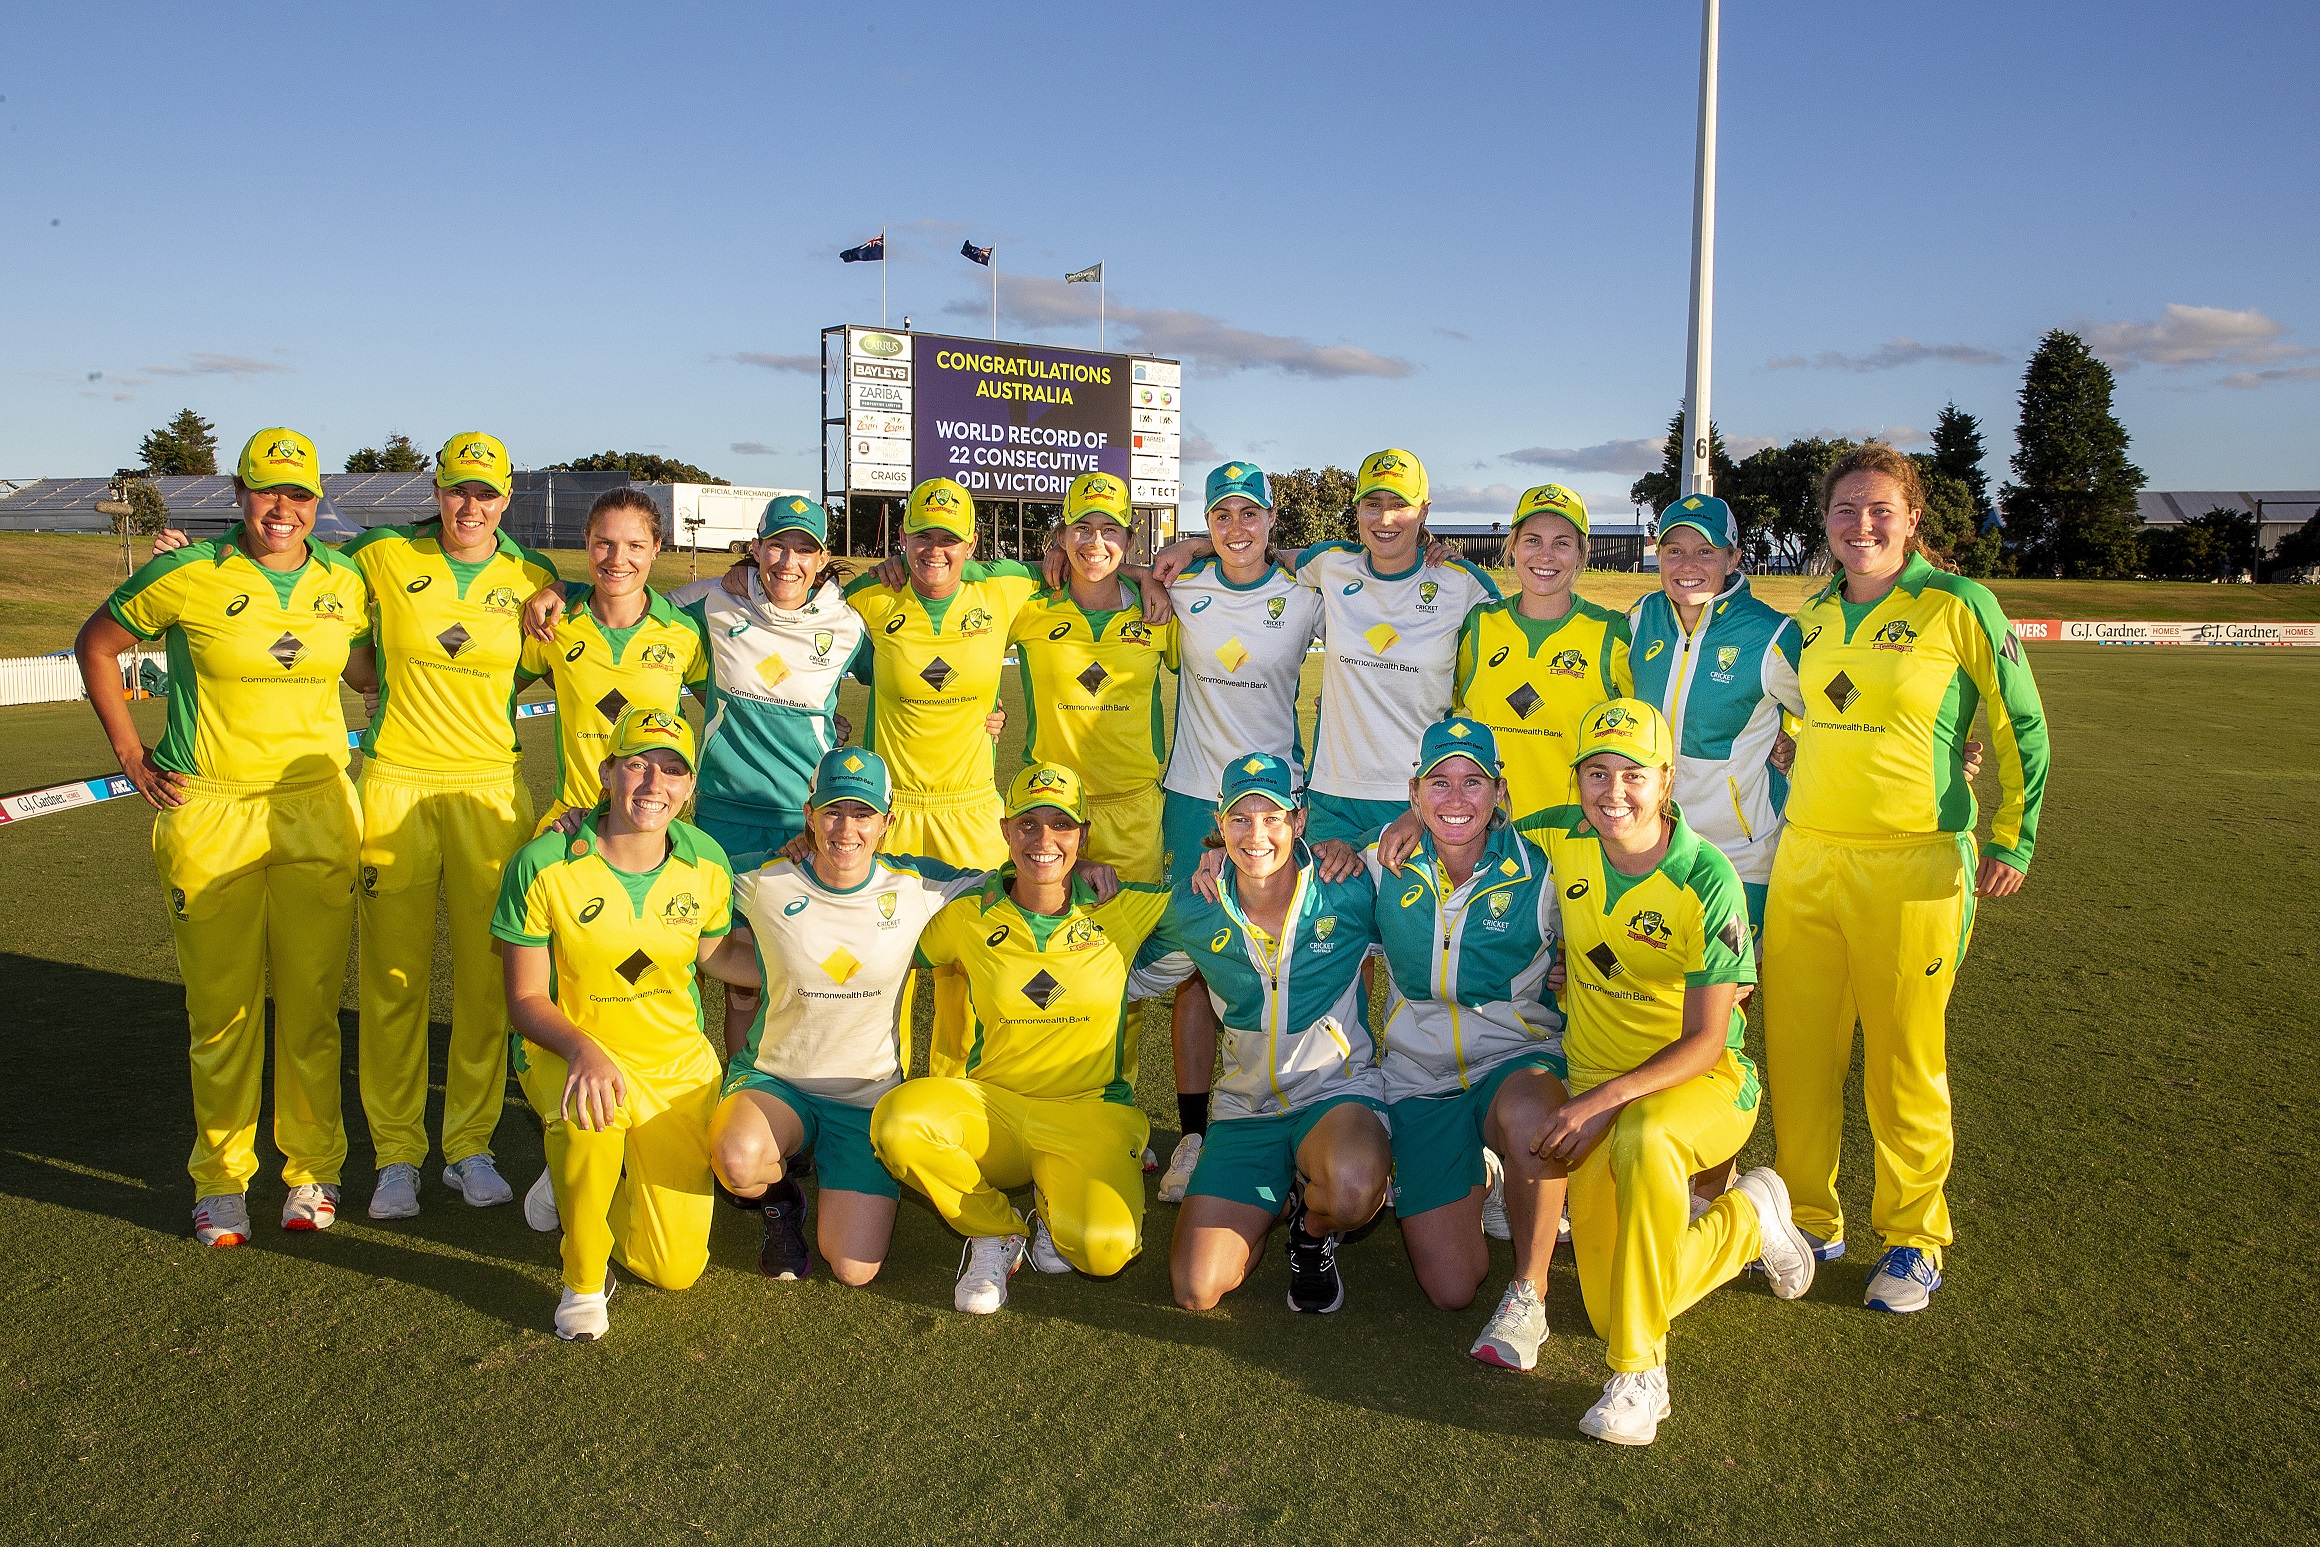 Twitter reacts to Meg Lanning’s Australia Women trumping Ponting’s invincibles to create all-time record